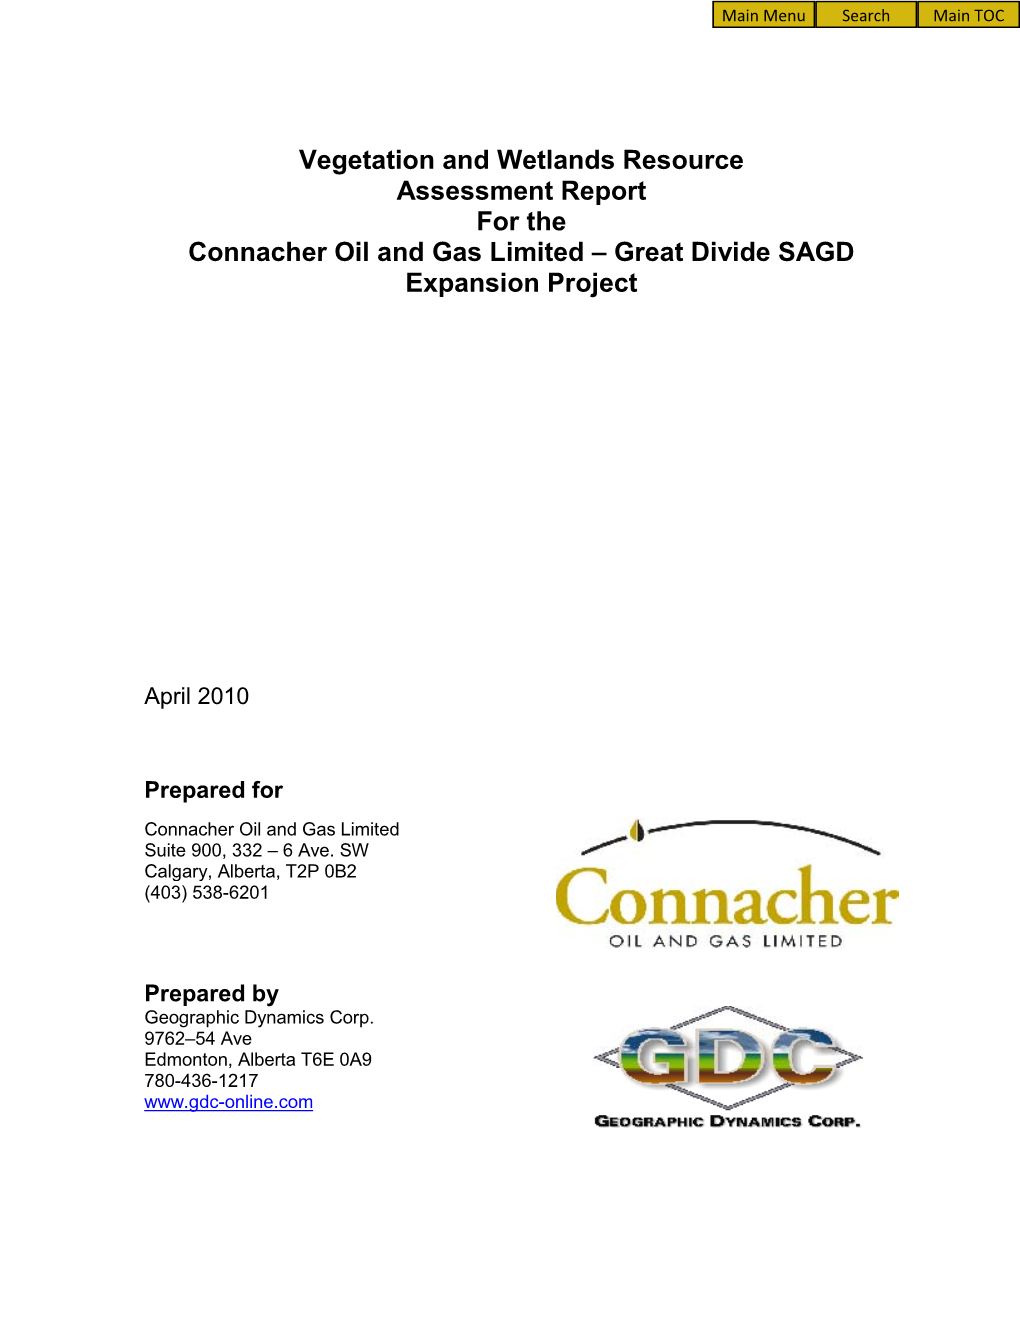 Vegetation and Wetlands Resource Assessment Report for the Connacher Oil and Gas Limited – Great Divide SAGD Expansion Project